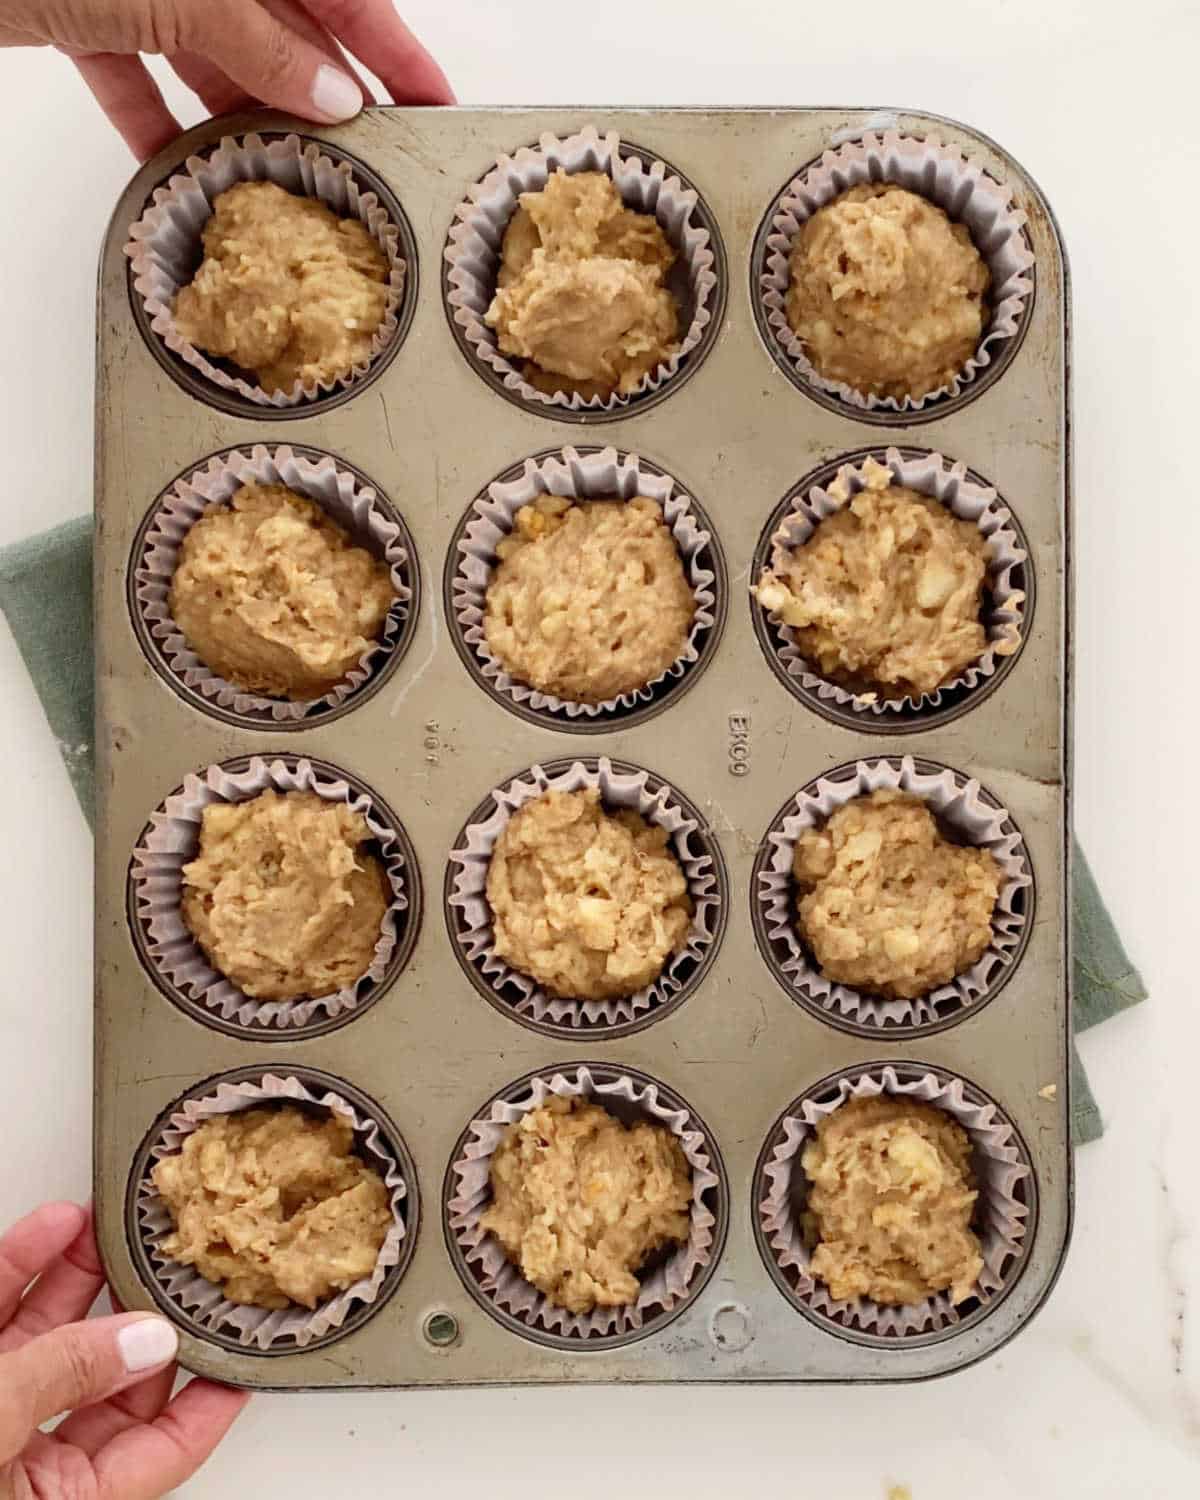 Metal muffin pan with paper liners filled with banana muffin batter. Hands holding it. White marble surface.